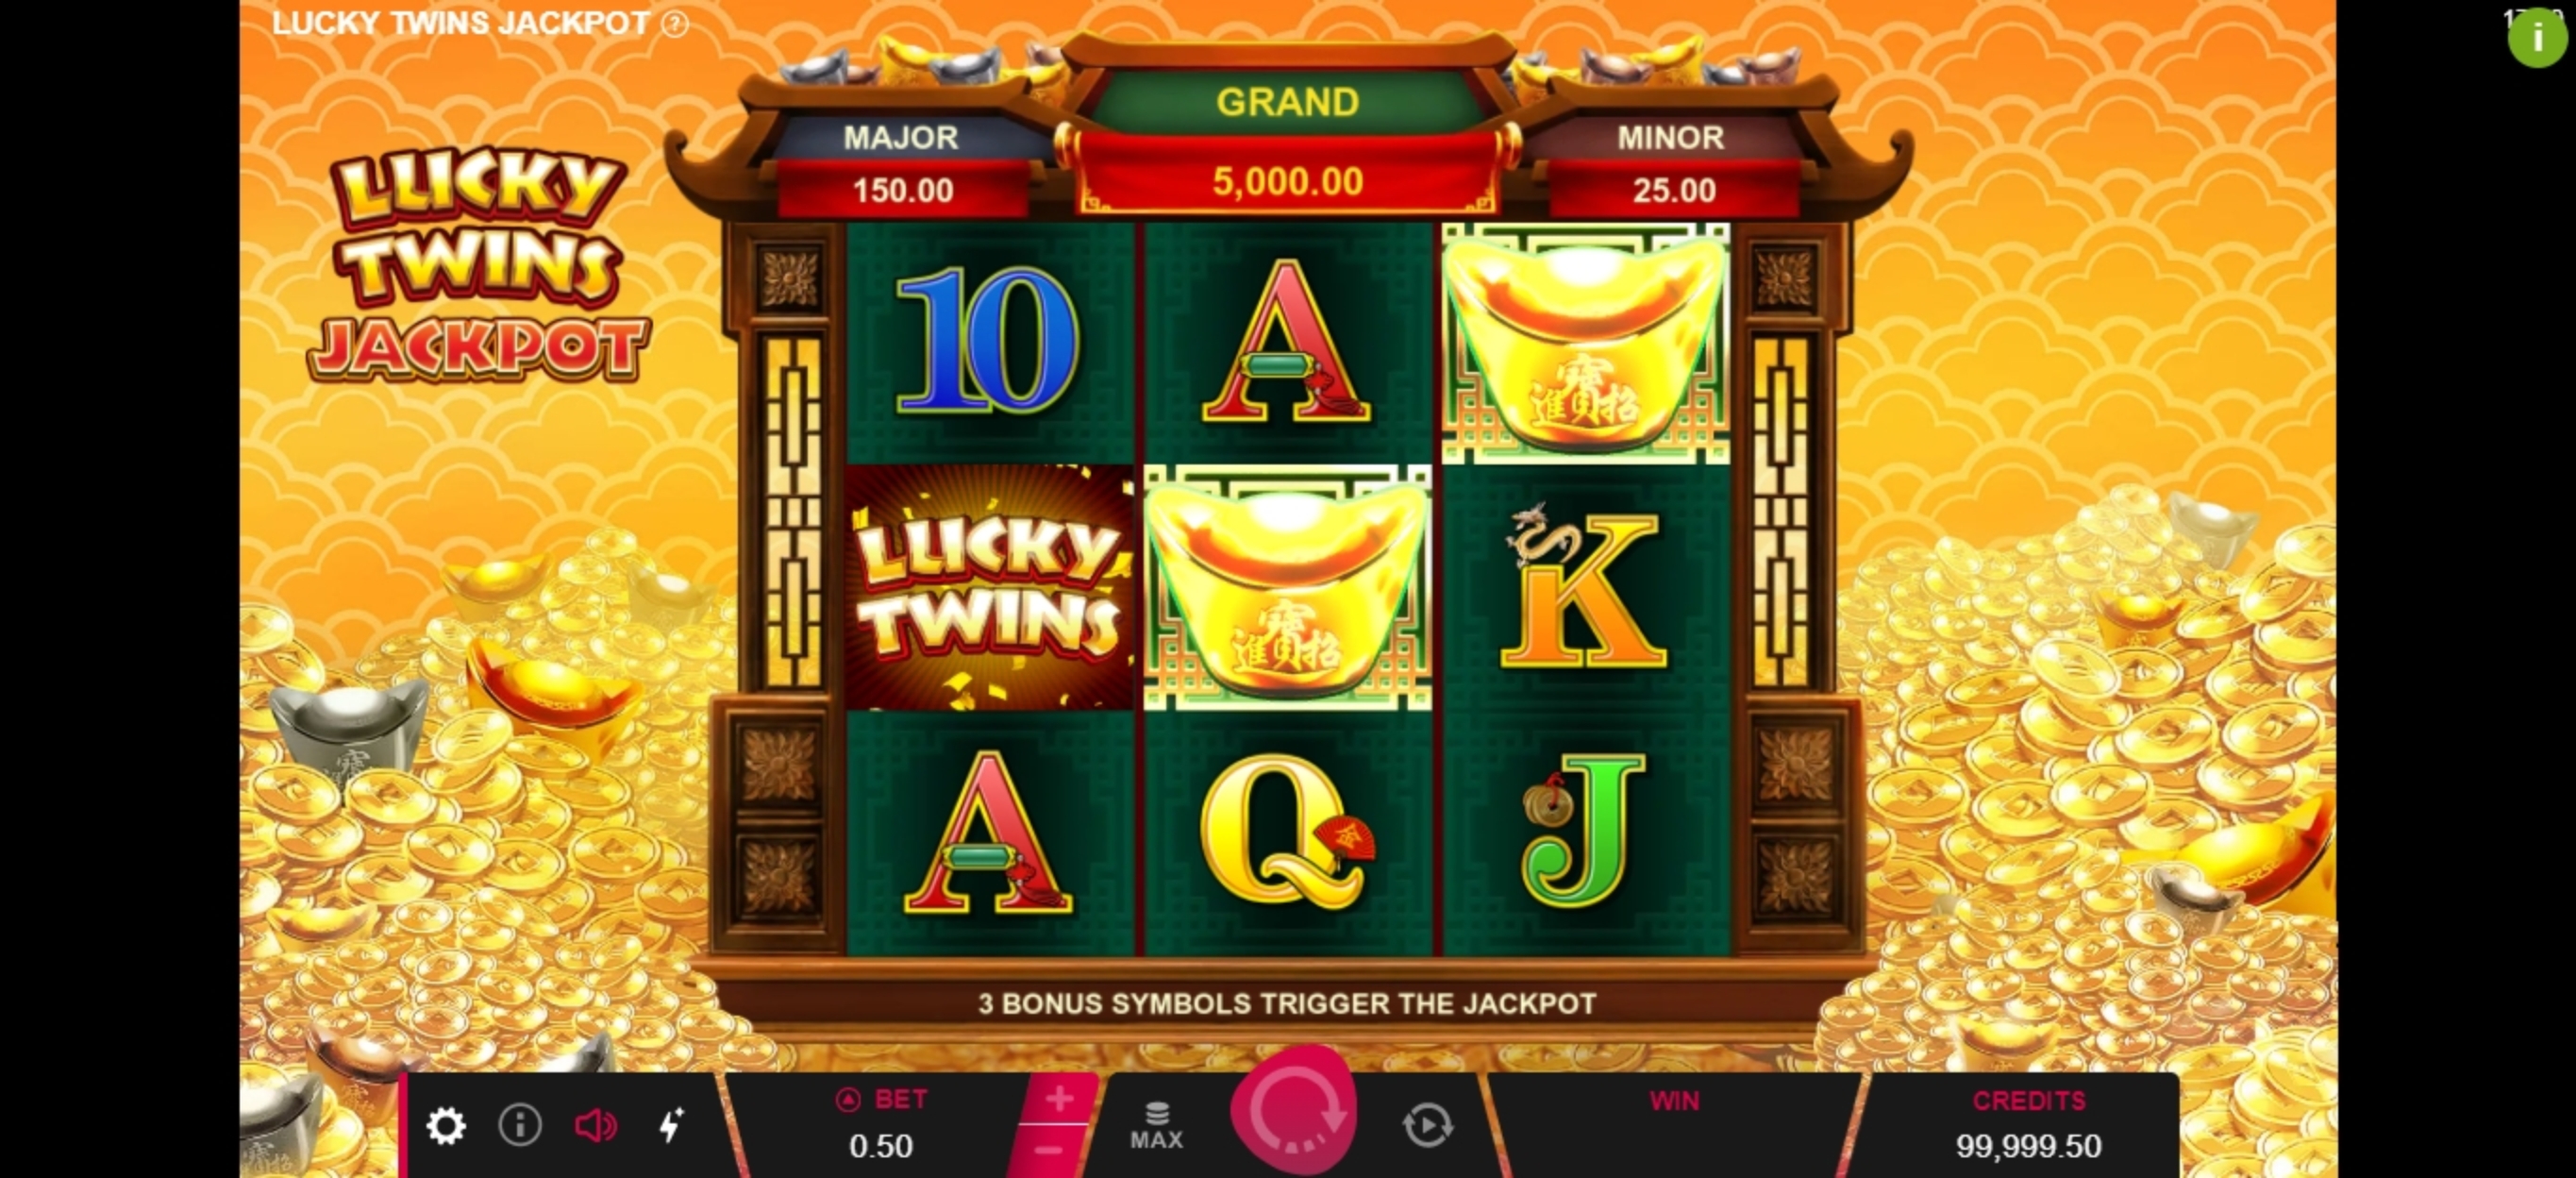 Win Money in Lucky Twins Jackpot Free Slot Game by Pulse 8 Studios